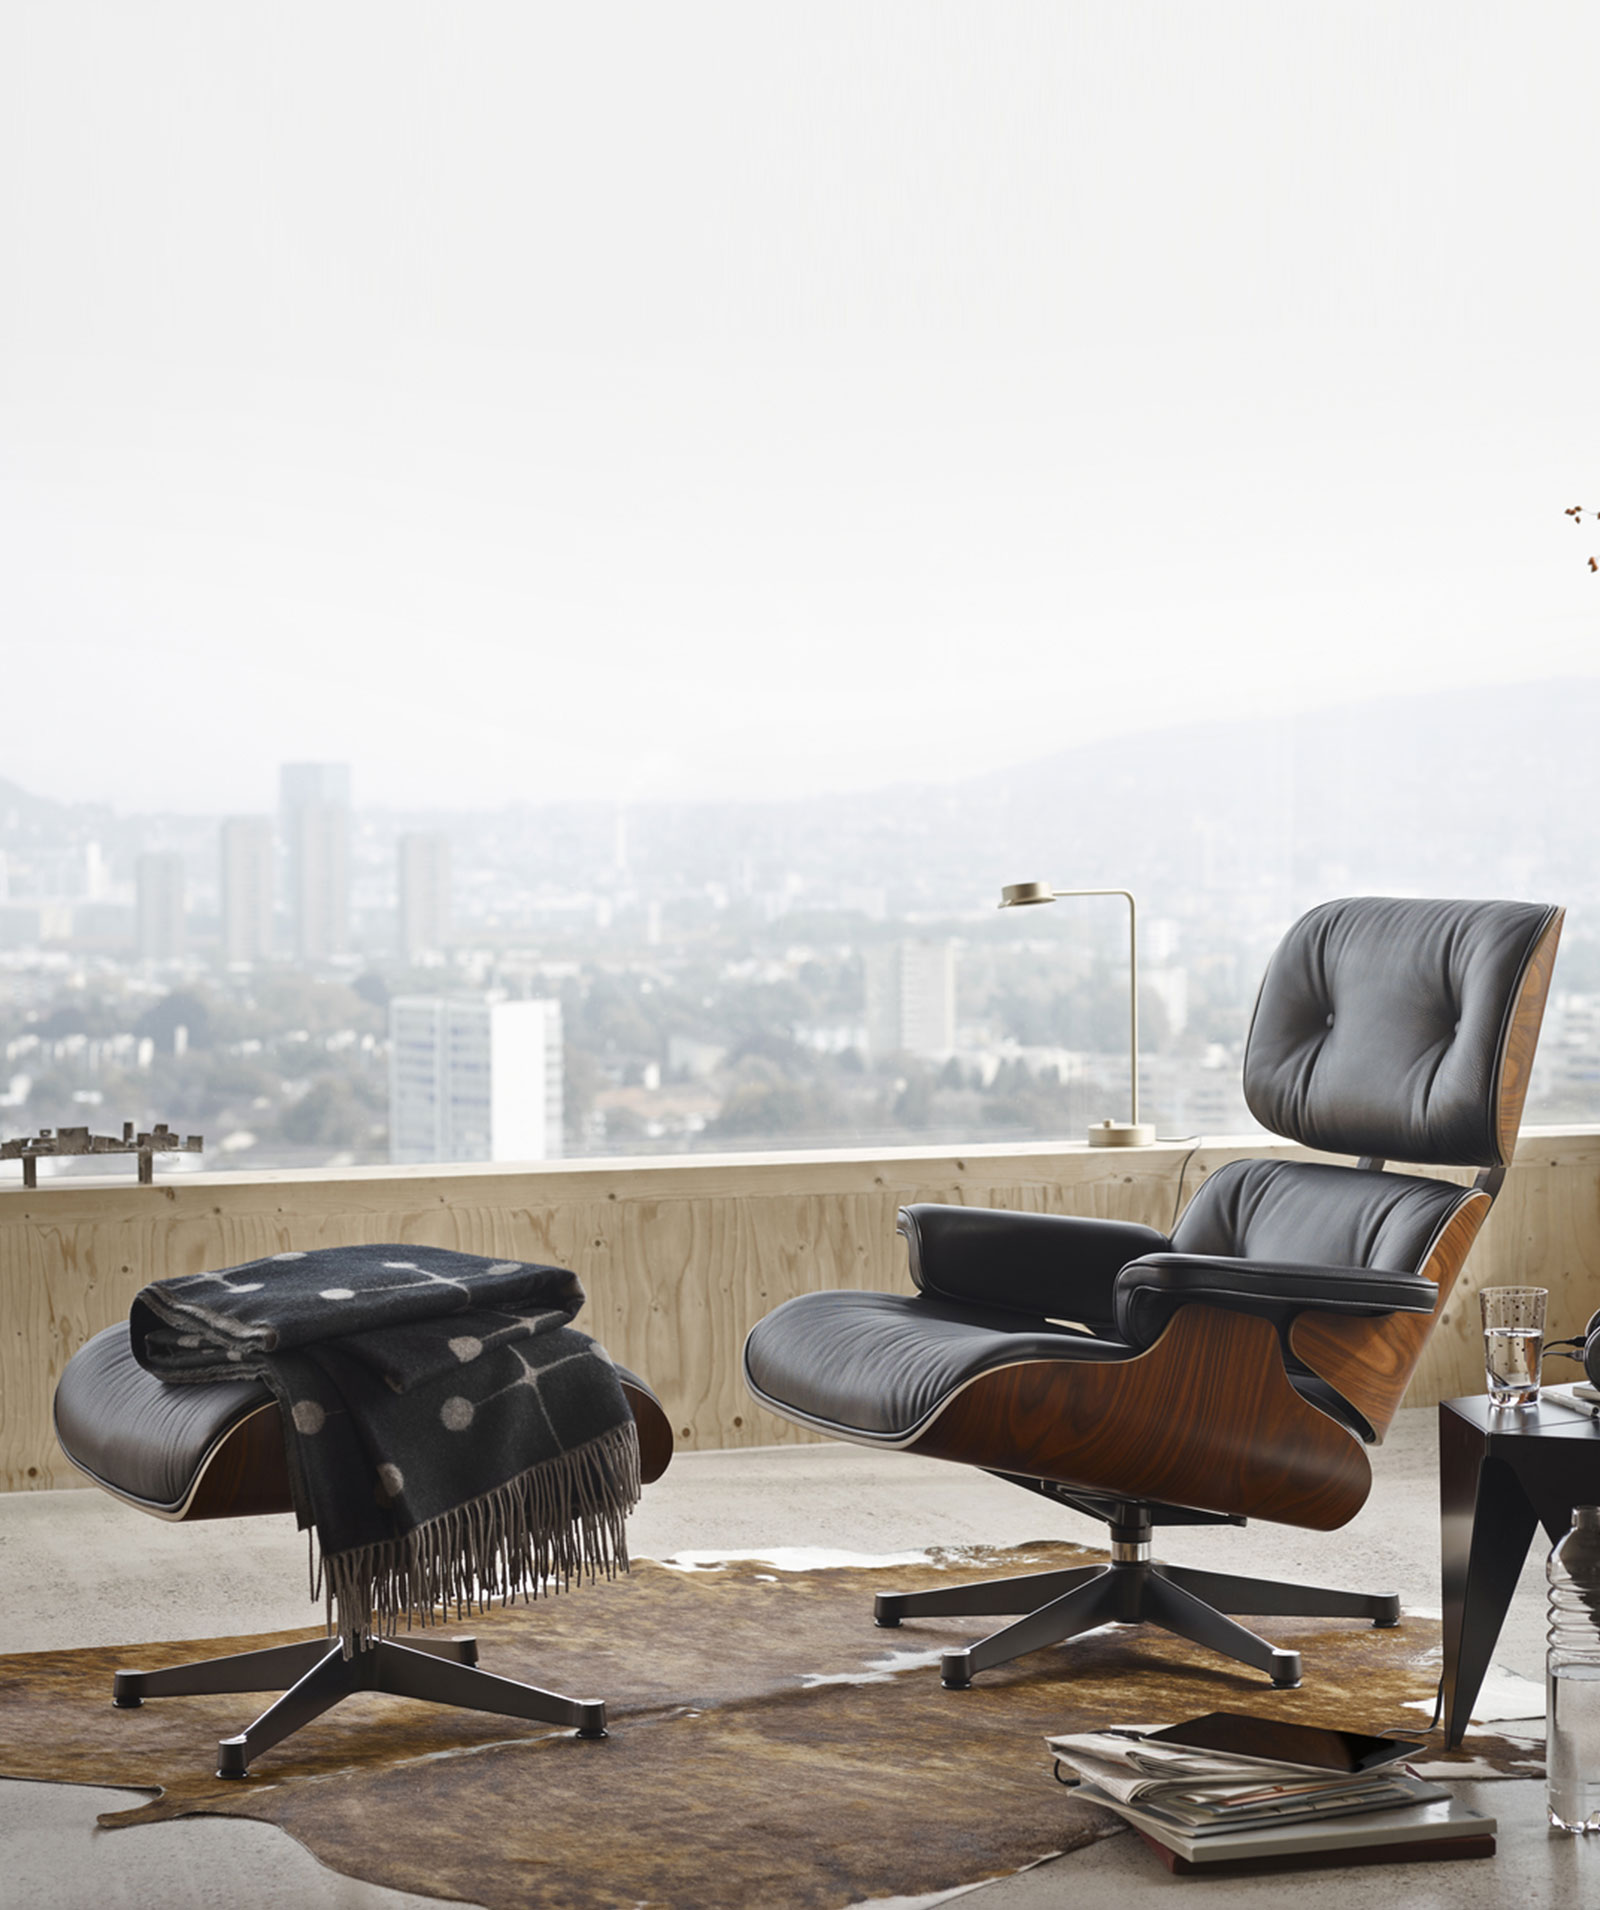 Berouw Clan Chinese kool Eames Lounge Chair VITRA Charles & Ray Eames, 1956 - design-icons.it